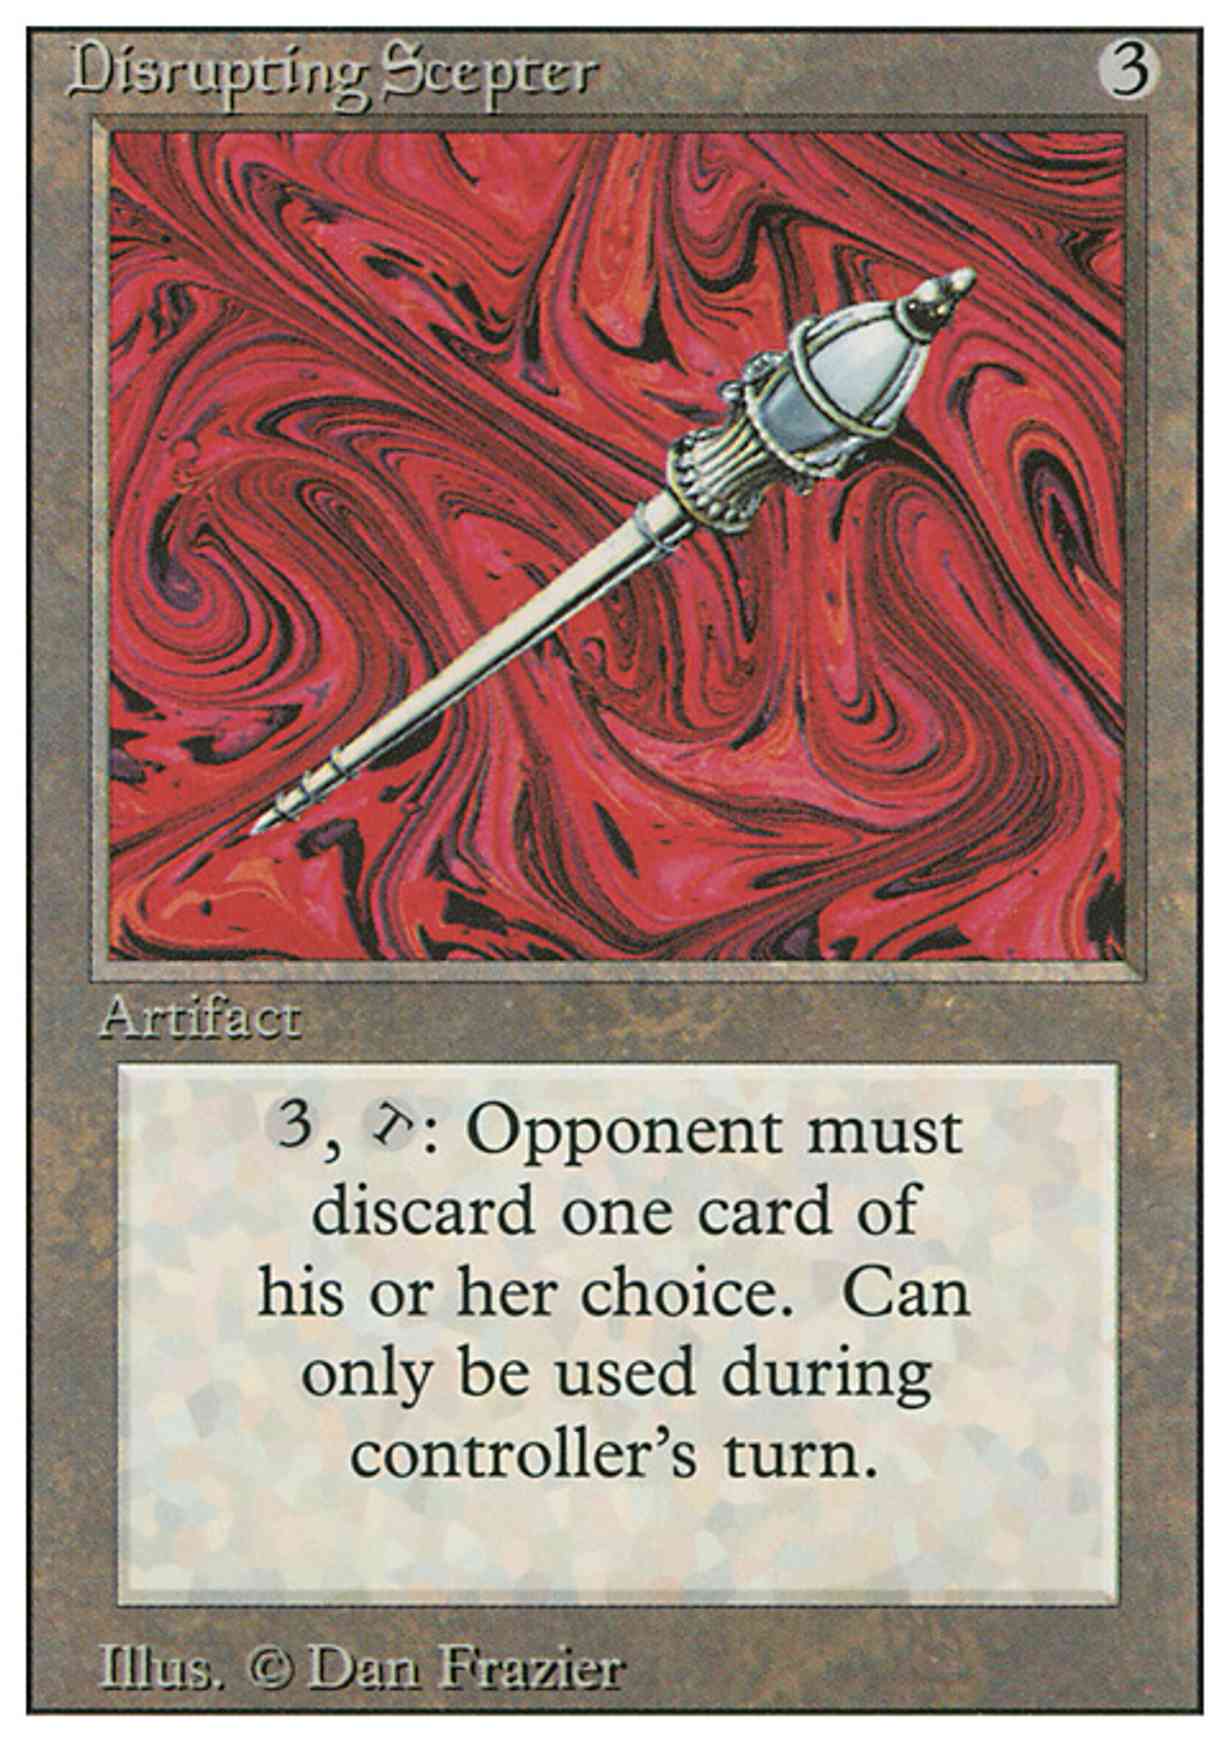 Disrupting Scepter magic card front